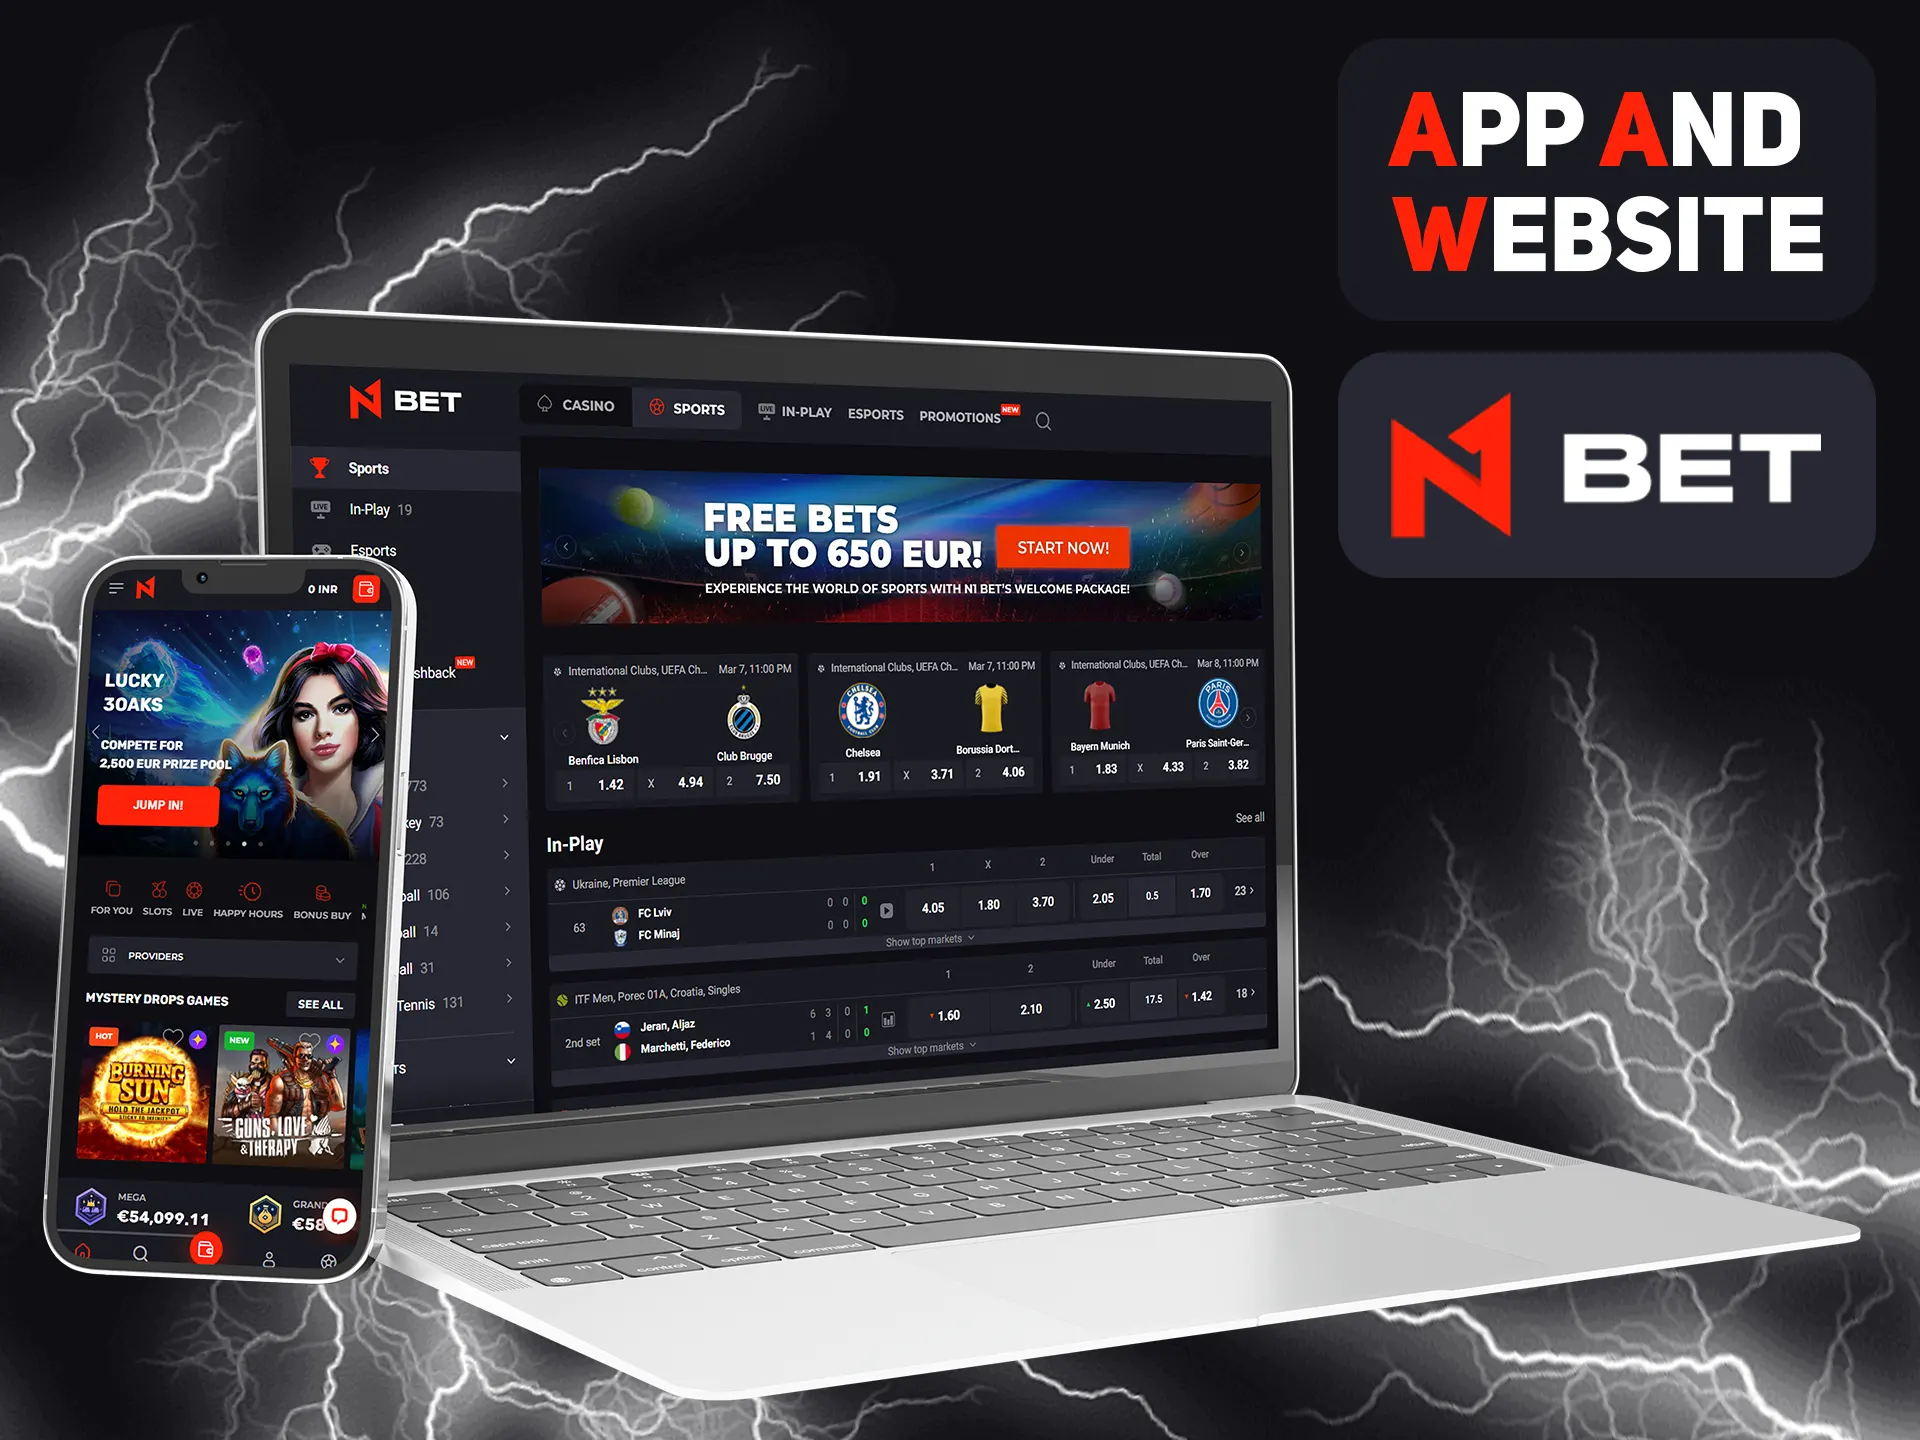 N1bet app provides more features.